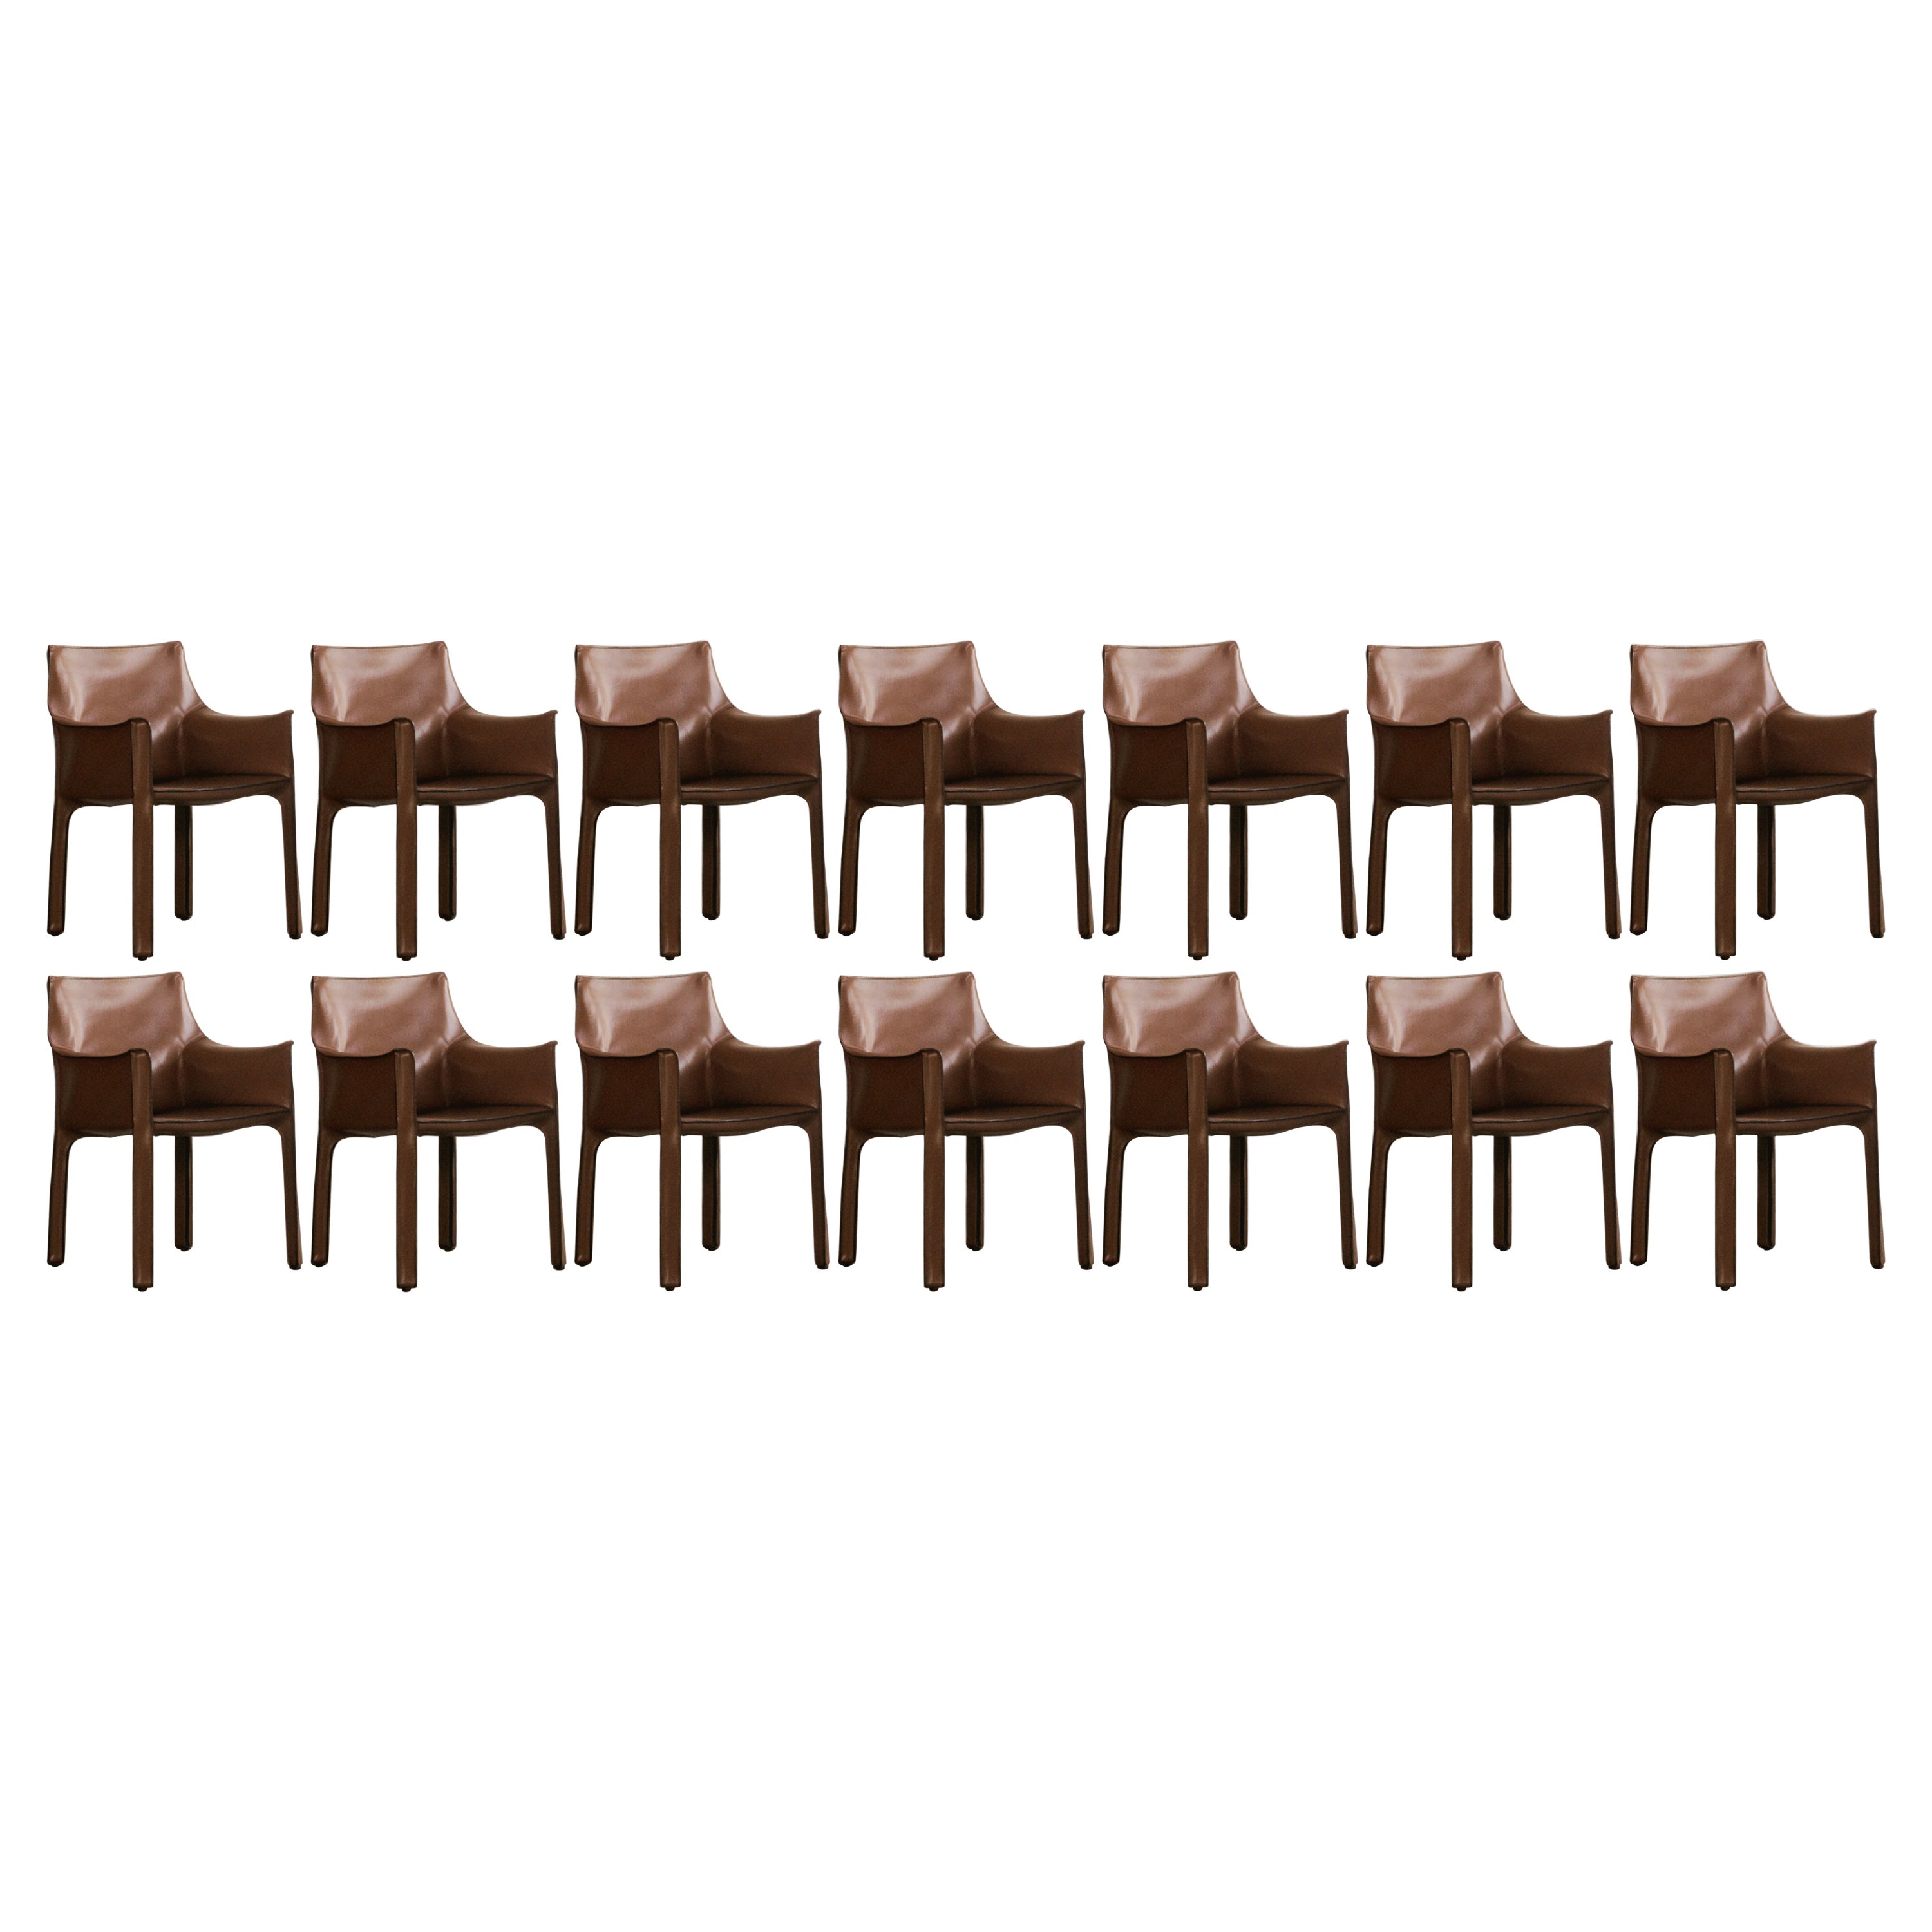 Mario Bellini "CAB 413" Chairs for Cassina in Light Brown, 1977, Set of 14